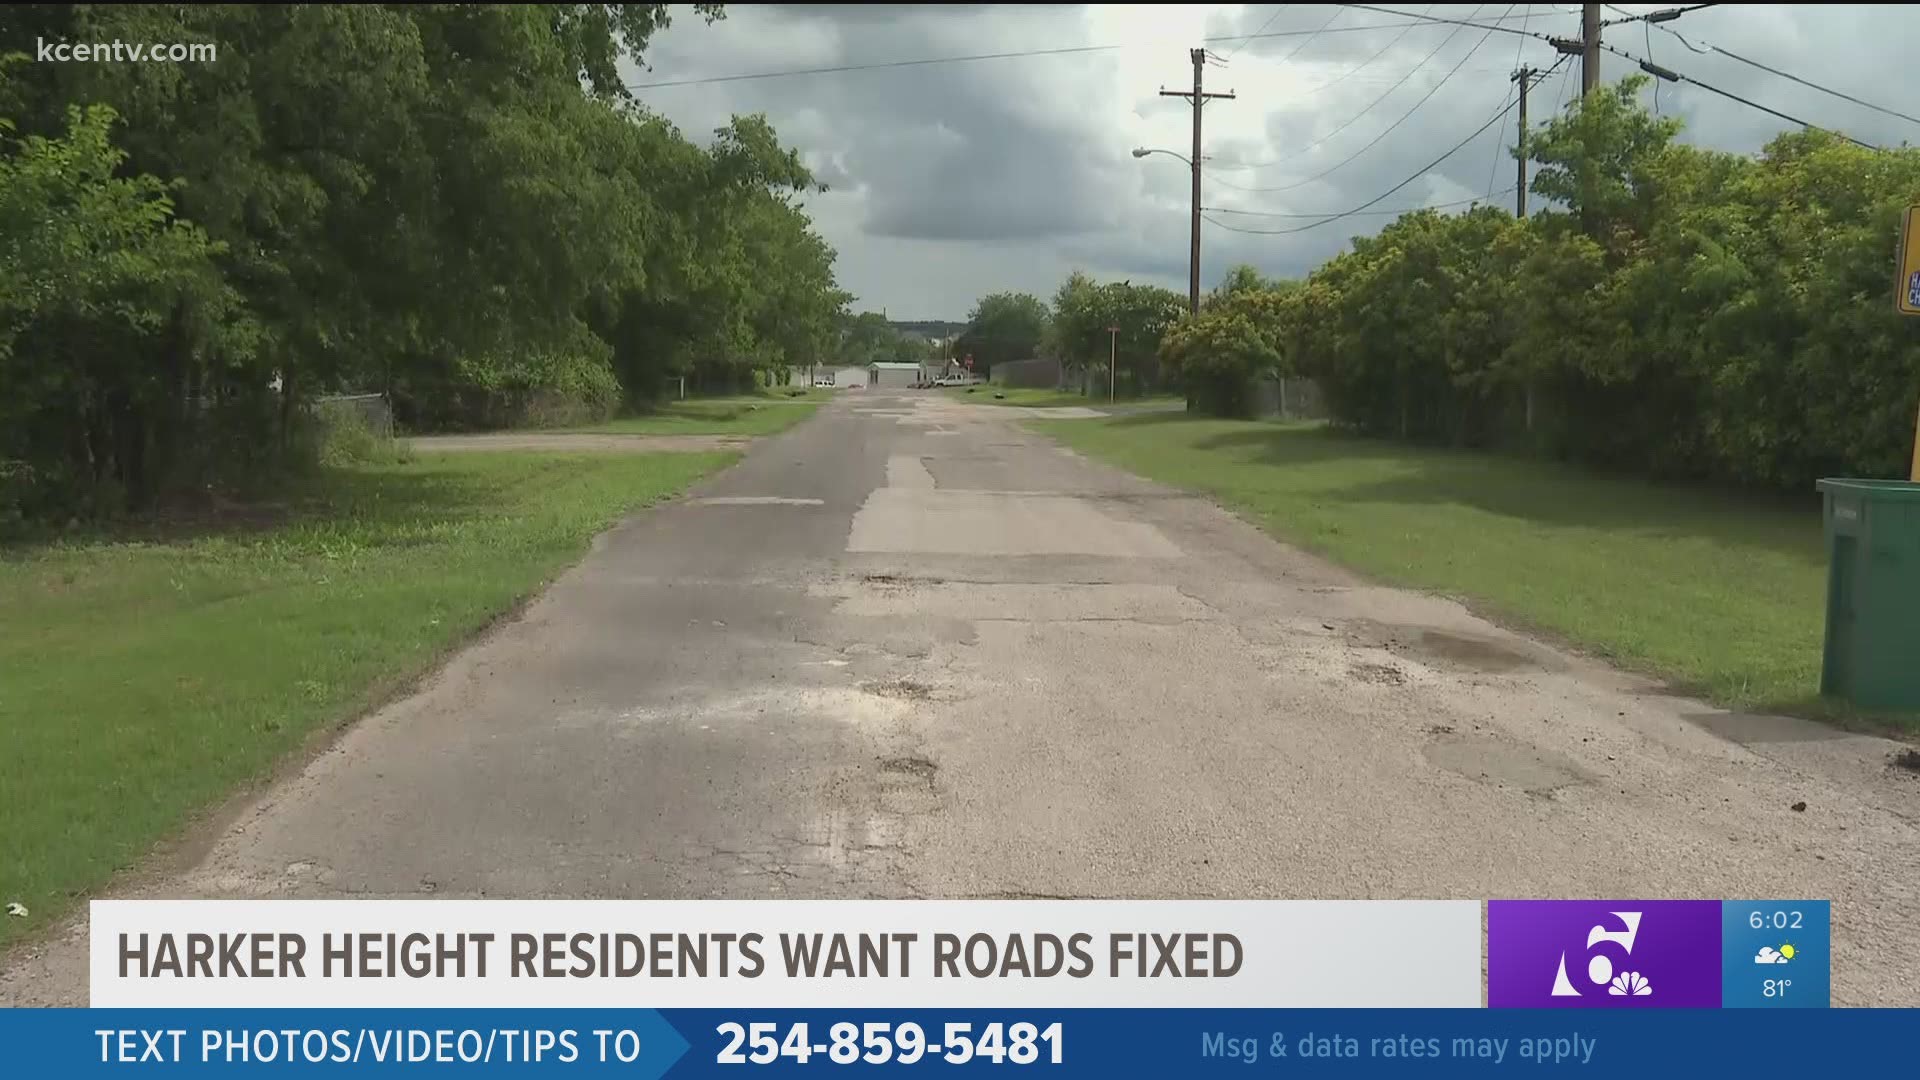 Harker Heights residents say they are tired of their roads being bumpy at Yoron Trail and Maya Trail.